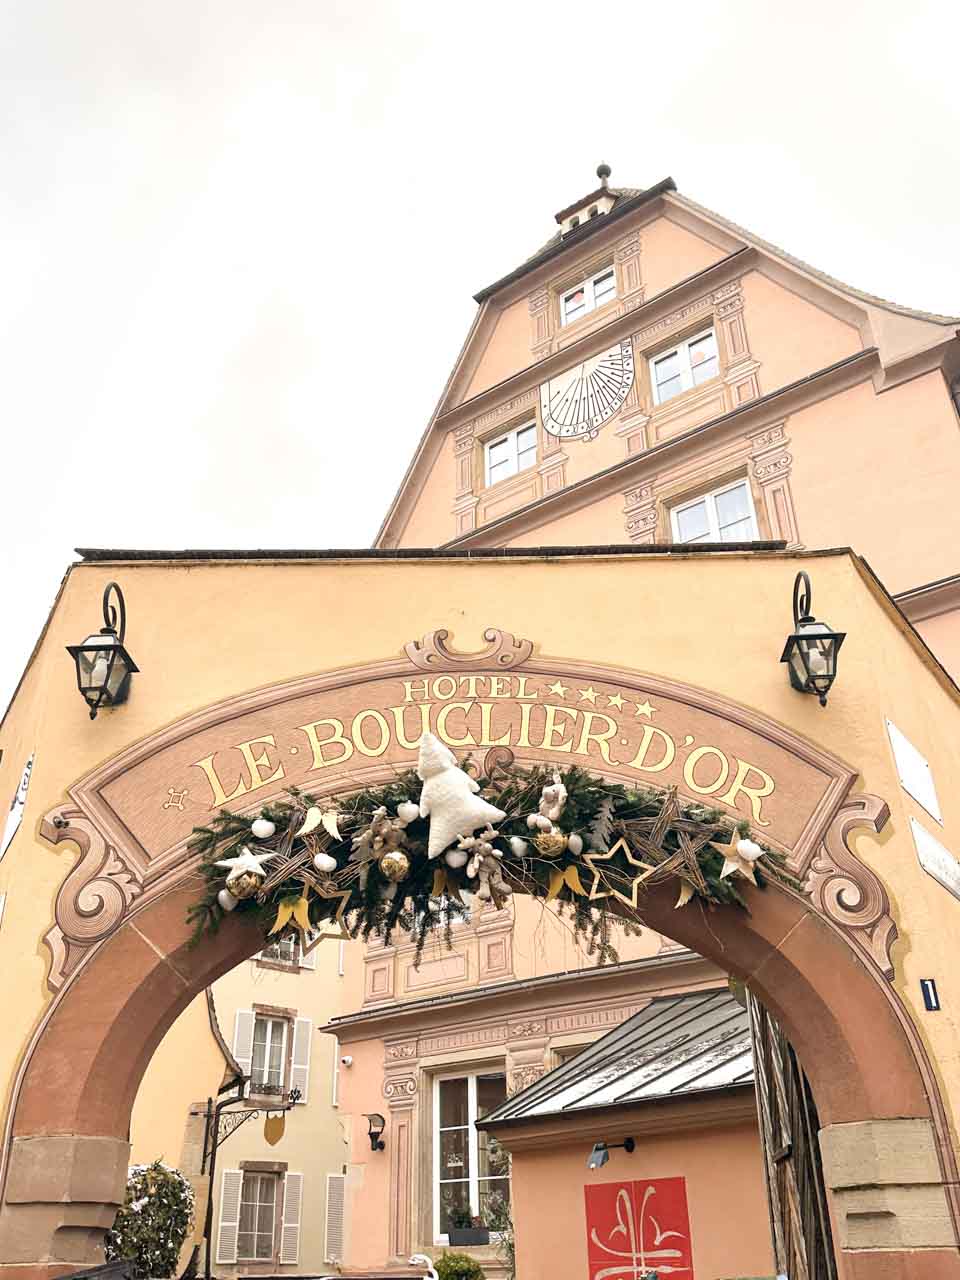 An elegant archway entrance to Hotel Le Bouclier d'Or in Strasbourg, festively decorated with greenery